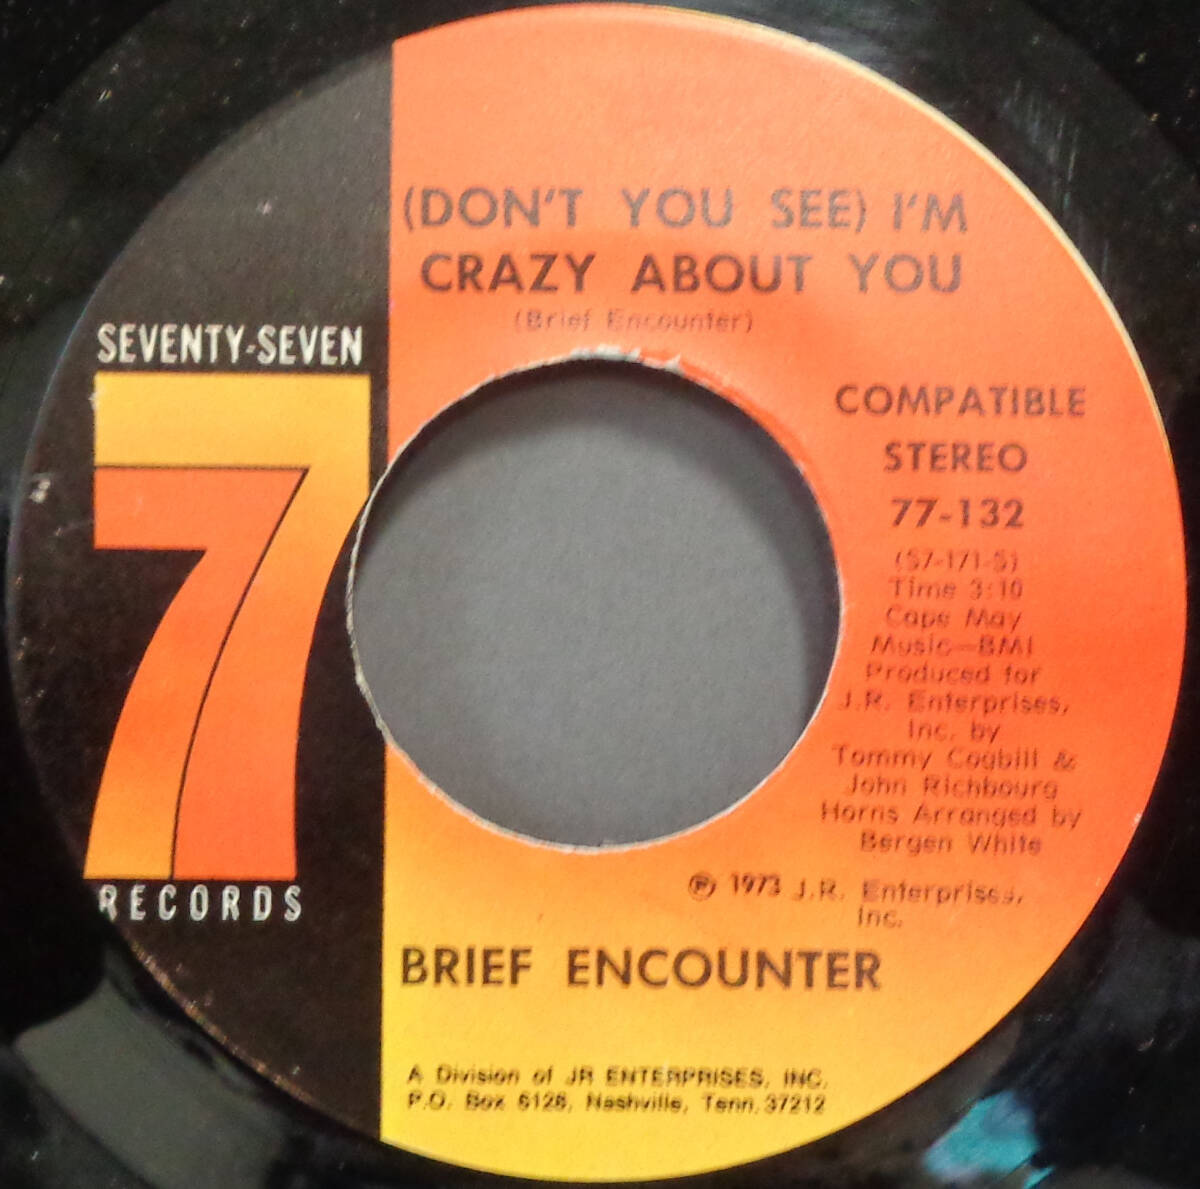 【SOUL 45】BRIEF ENCOUNTER - (DON'T YOU SEE) I'M CRAZY ABOUT YOU / WE'RE GOING TO MAKE IT (s240512008)_画像1